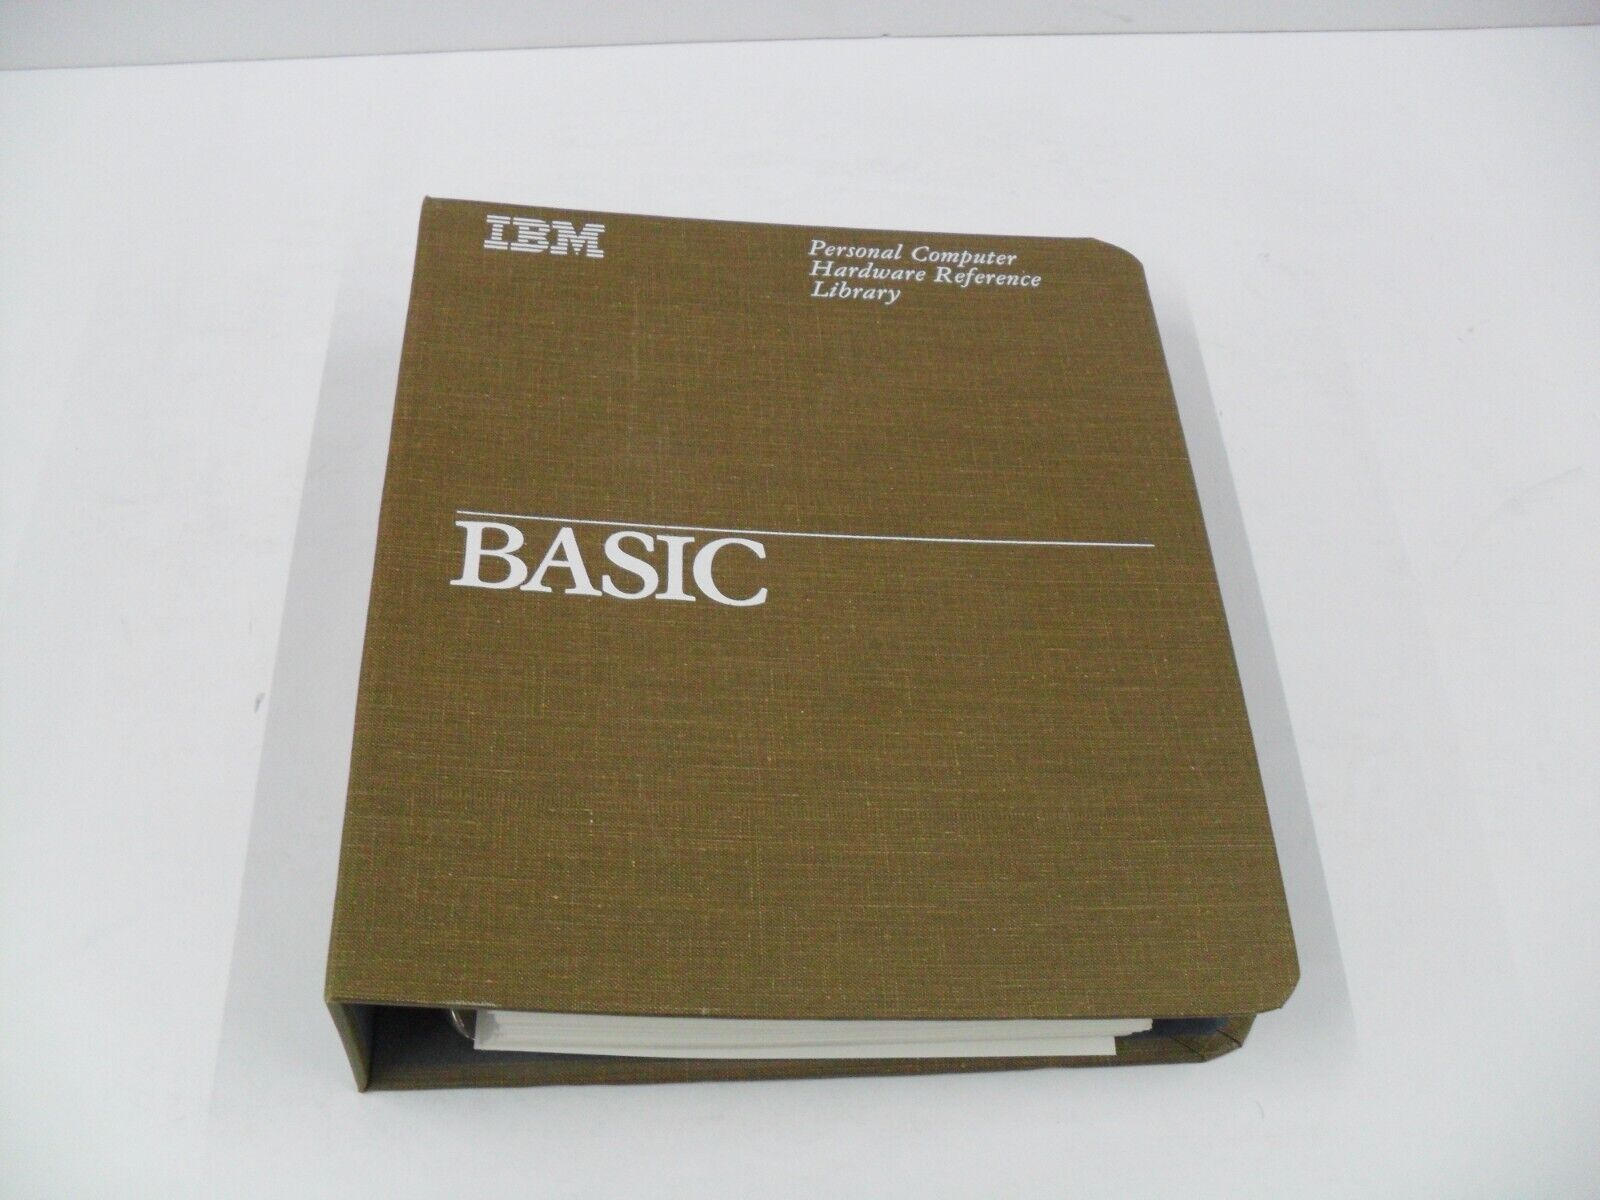 IBM 3.0 Basic Personal Computer Hardware Reference Library 6361132 1984: 3rd Ed